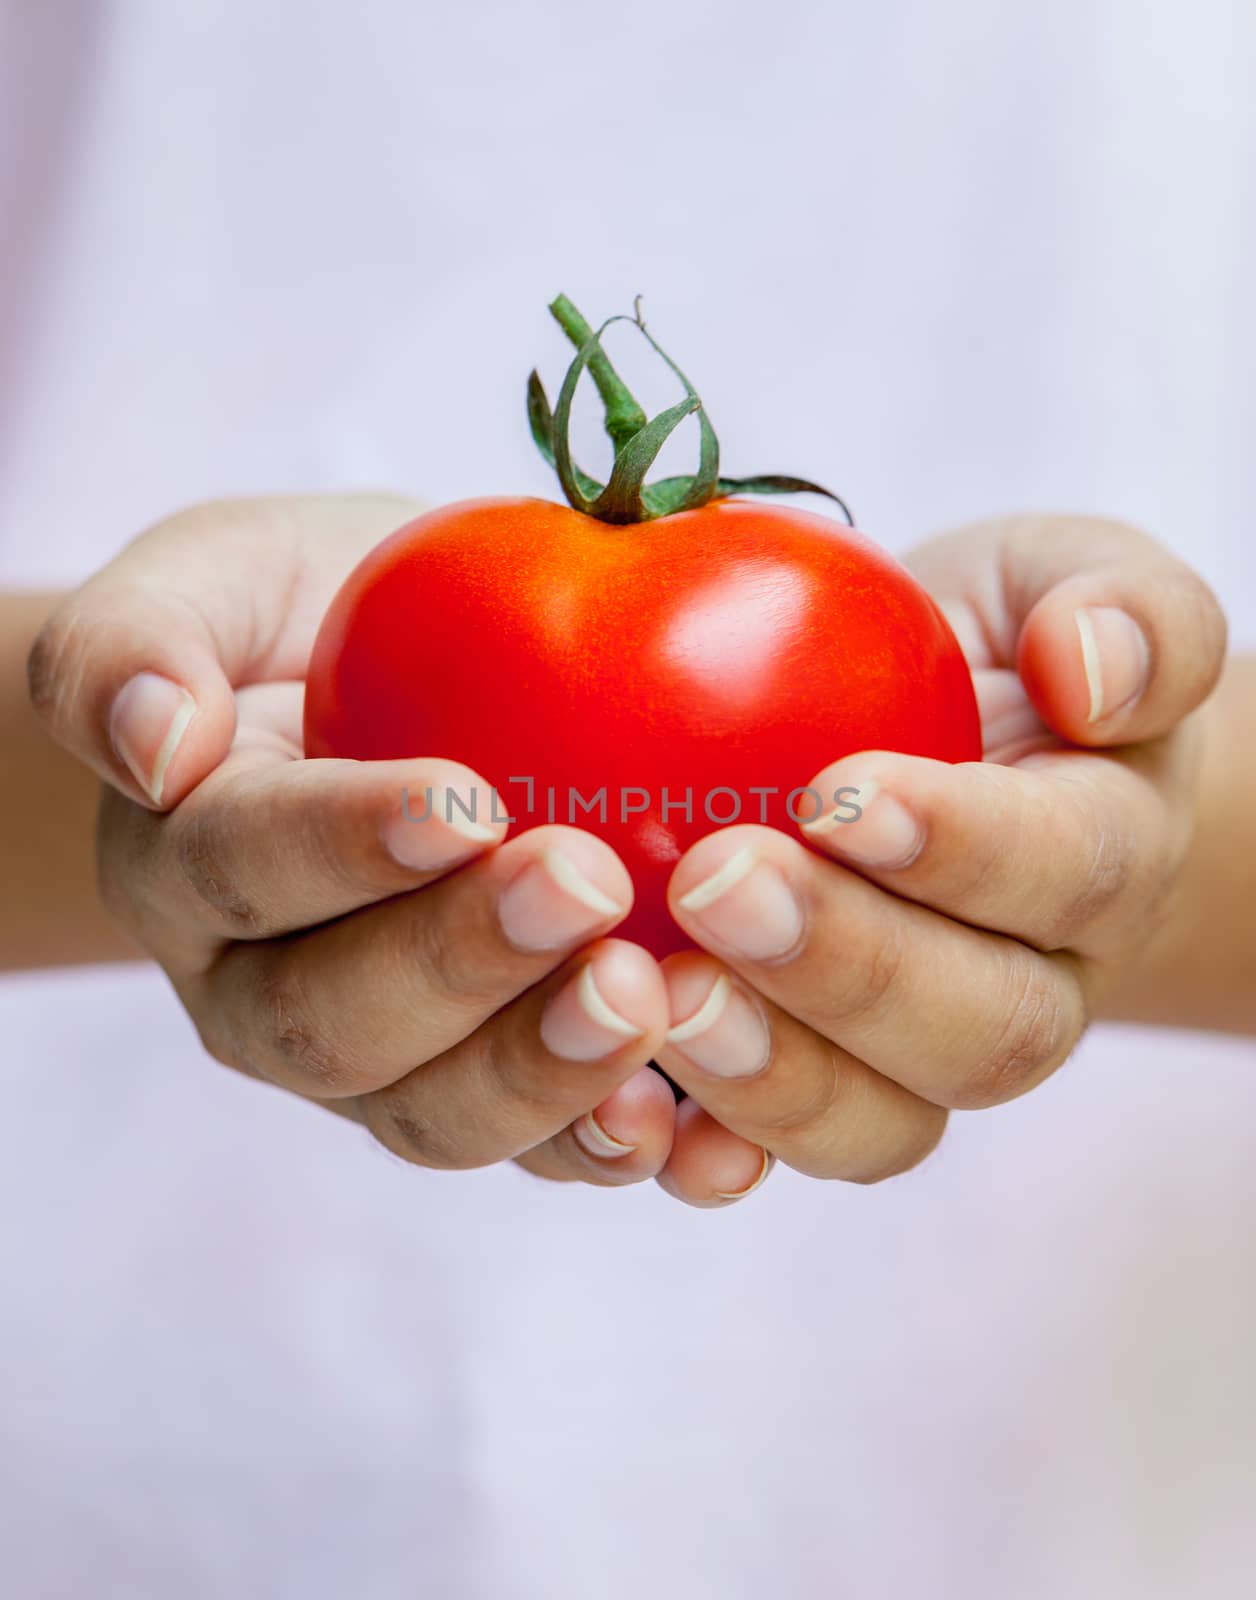 The Girl holding tomato. - Healthy food concept.